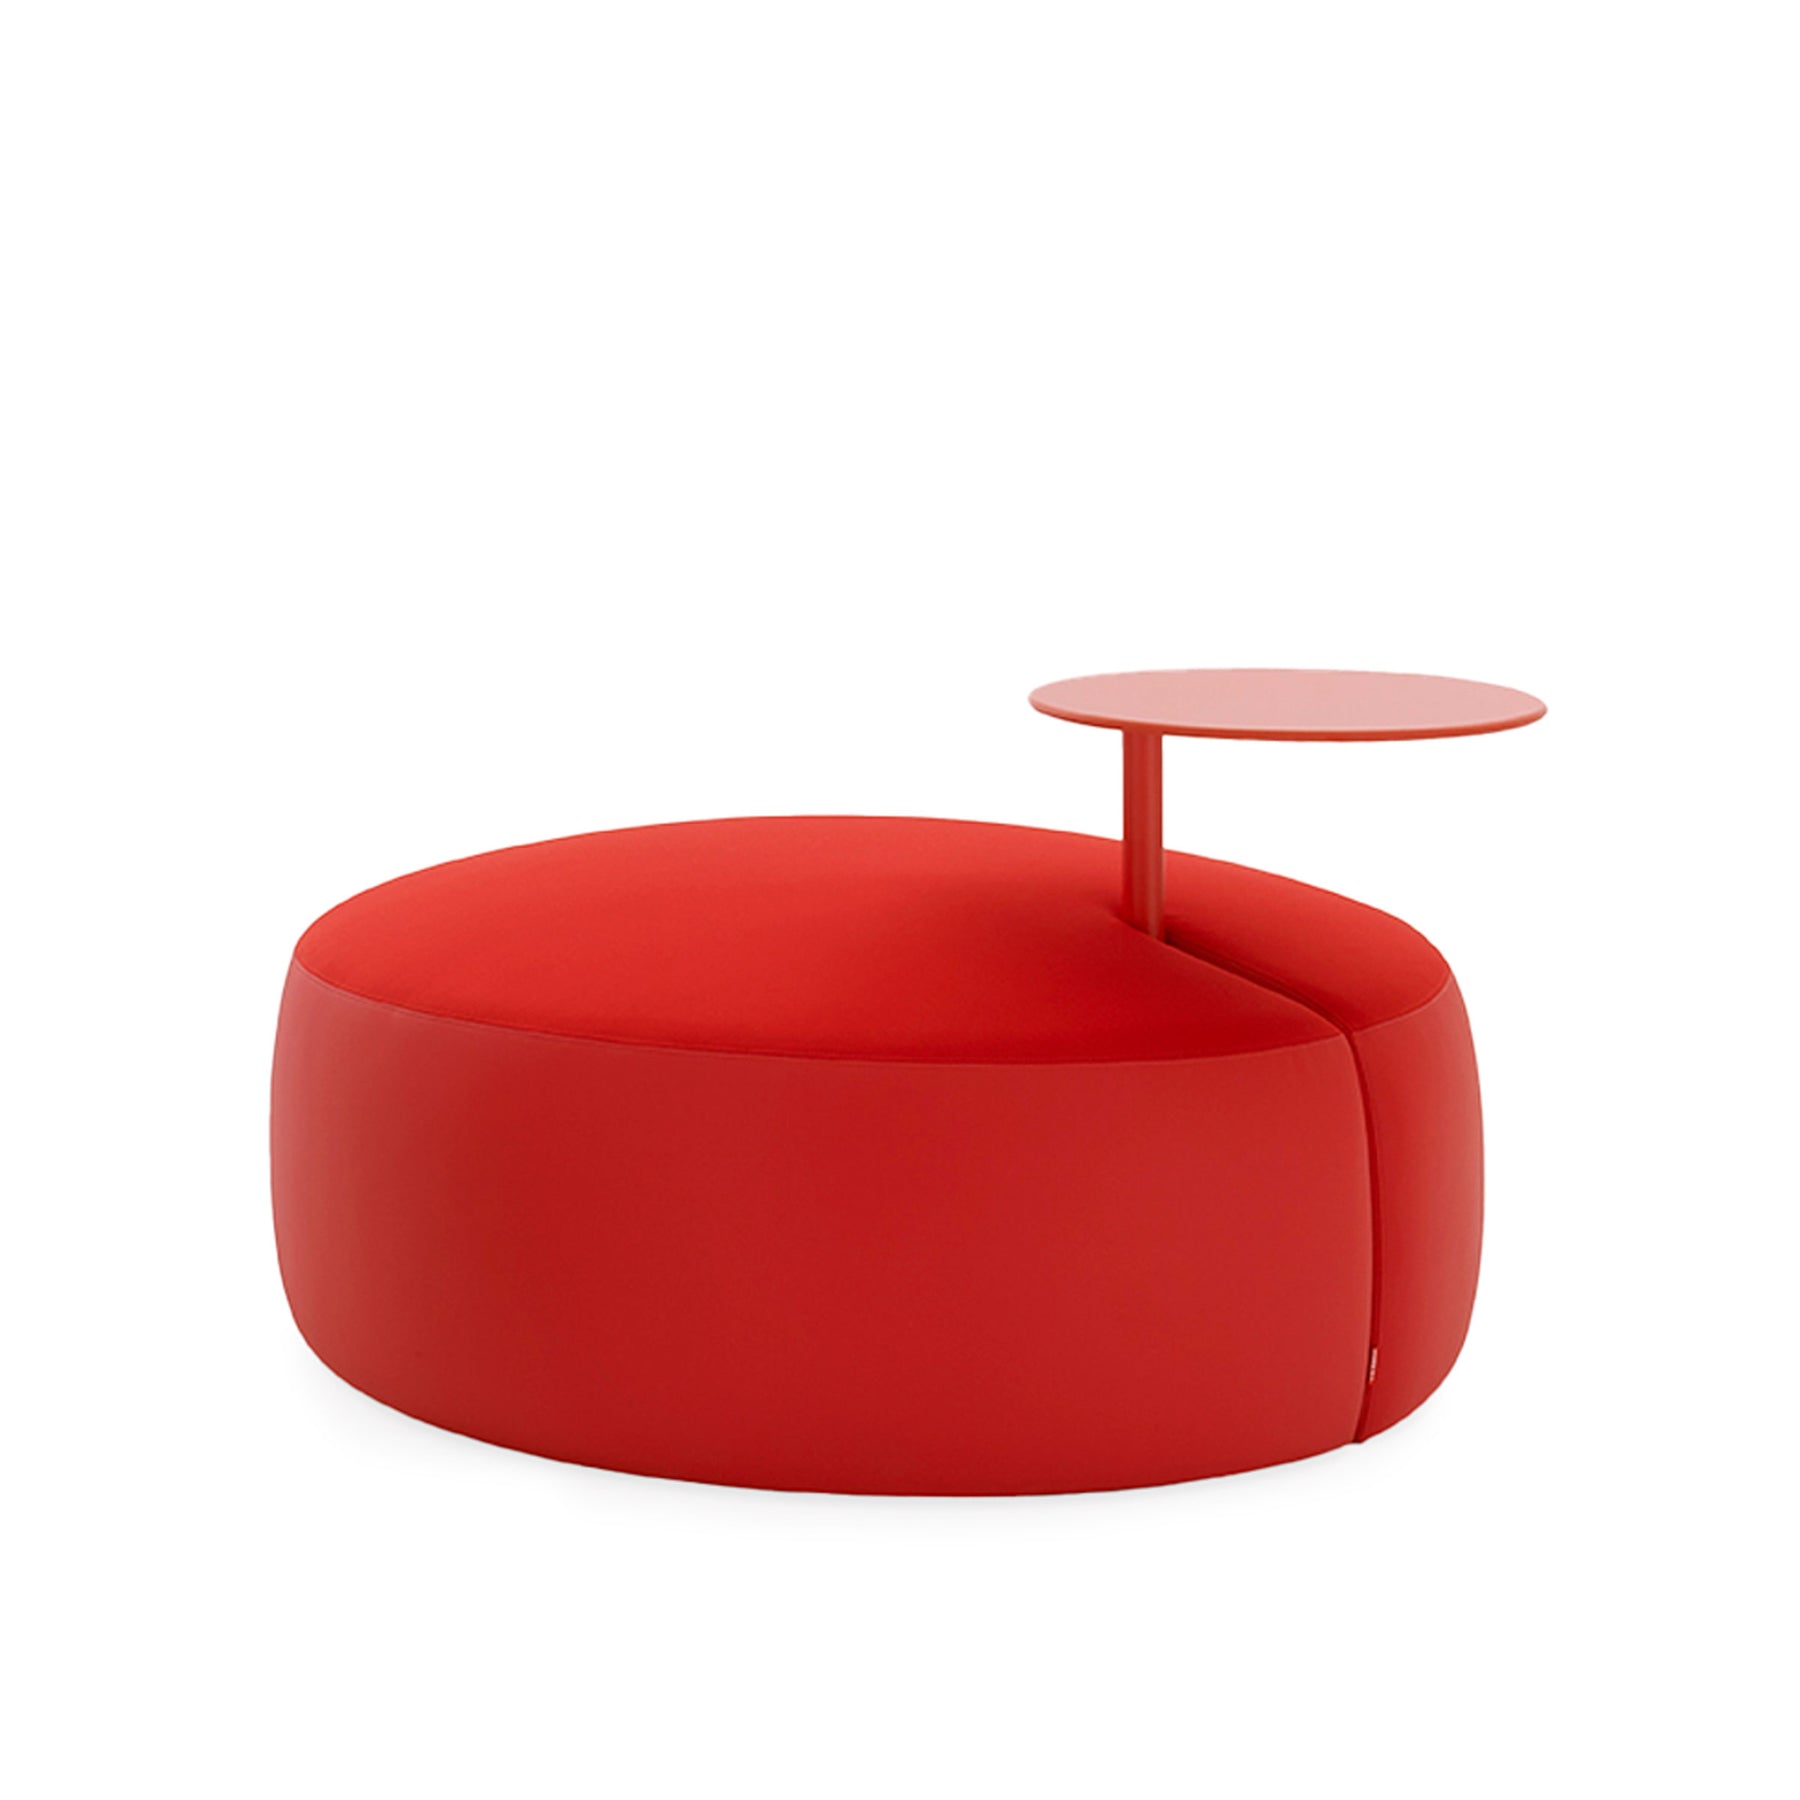 The foam fabric Pouf by Vigano is also a coffee table and whatever you may think of - Design Italy